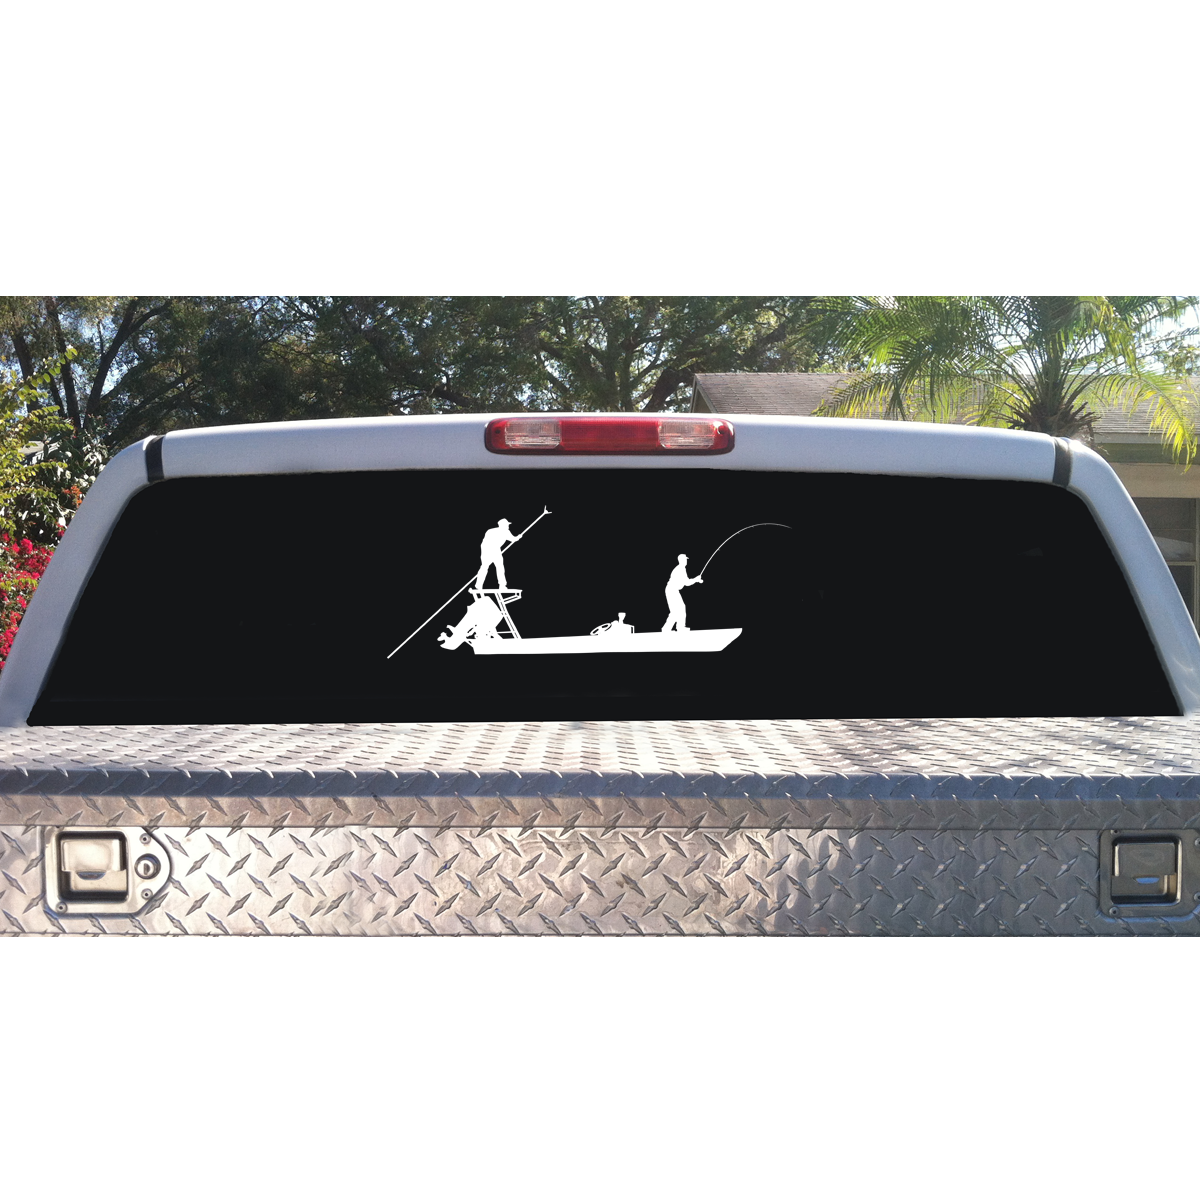 Fish Decals and Stickers for car, truck or boat